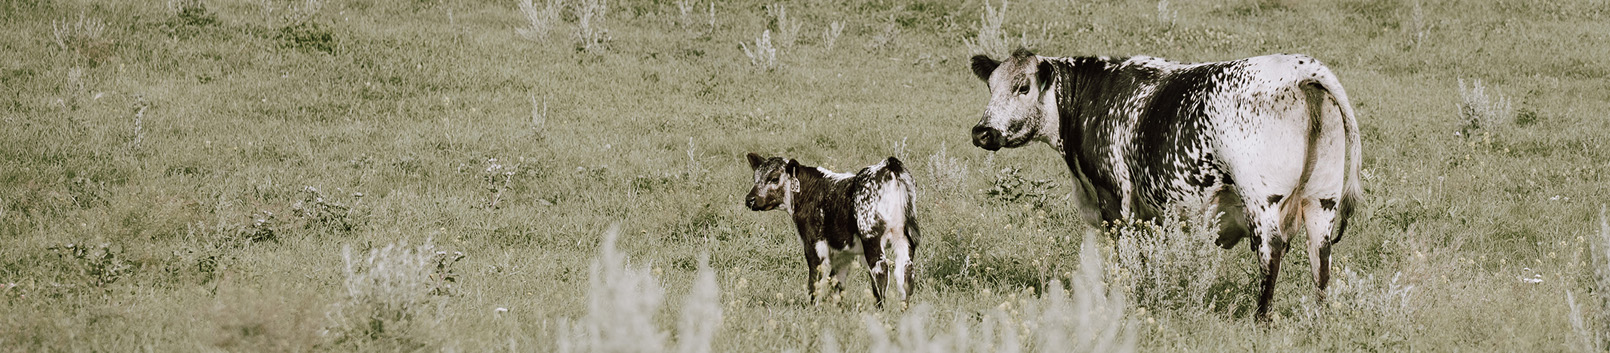 a cow calf pair stand next to each other in pasture looking towards camera